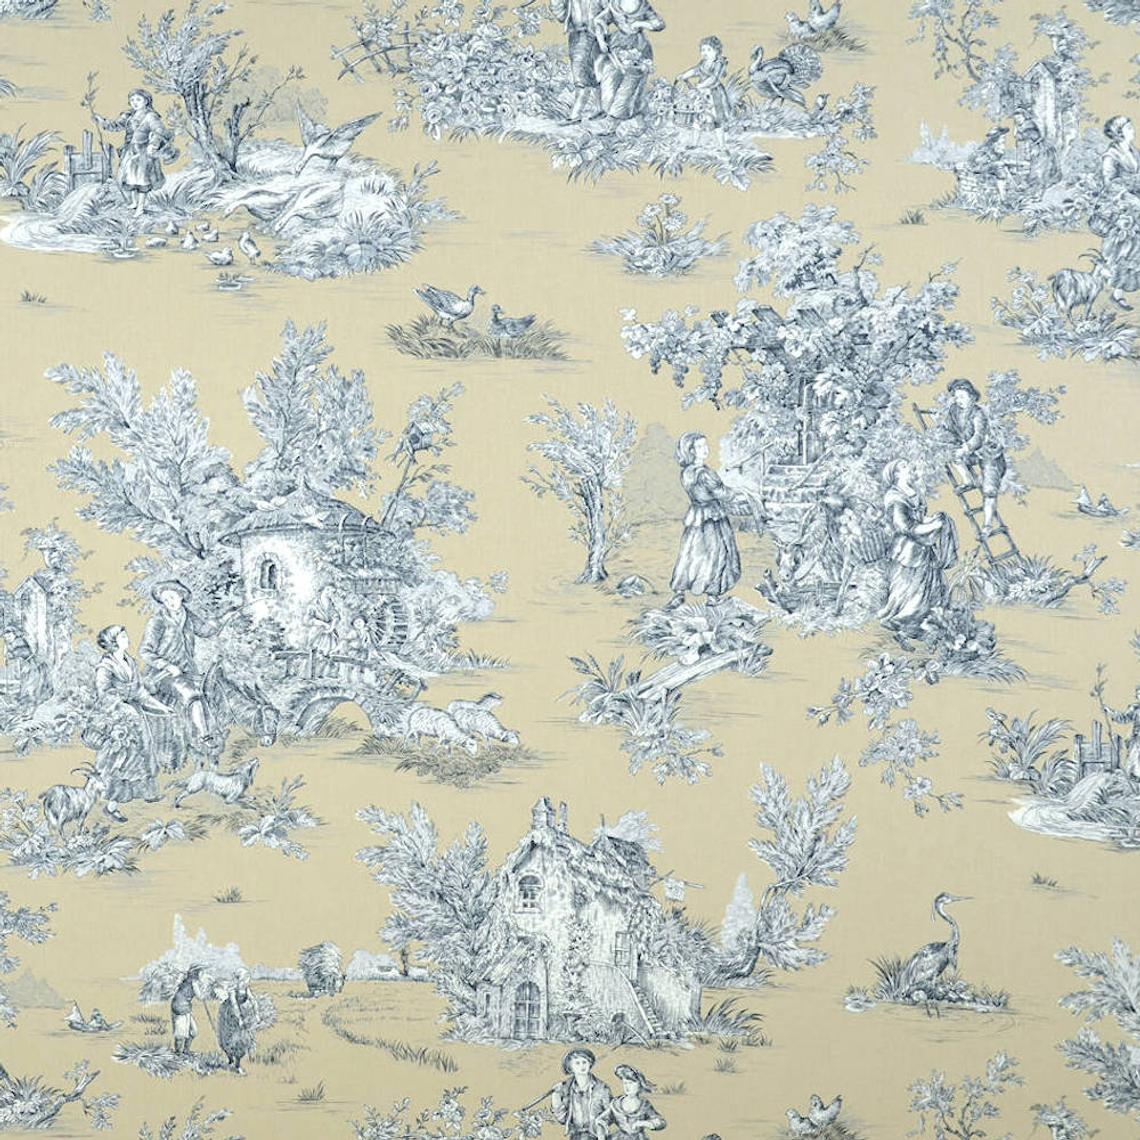 pillow sham in pastorale #88 blue on beige french country toile